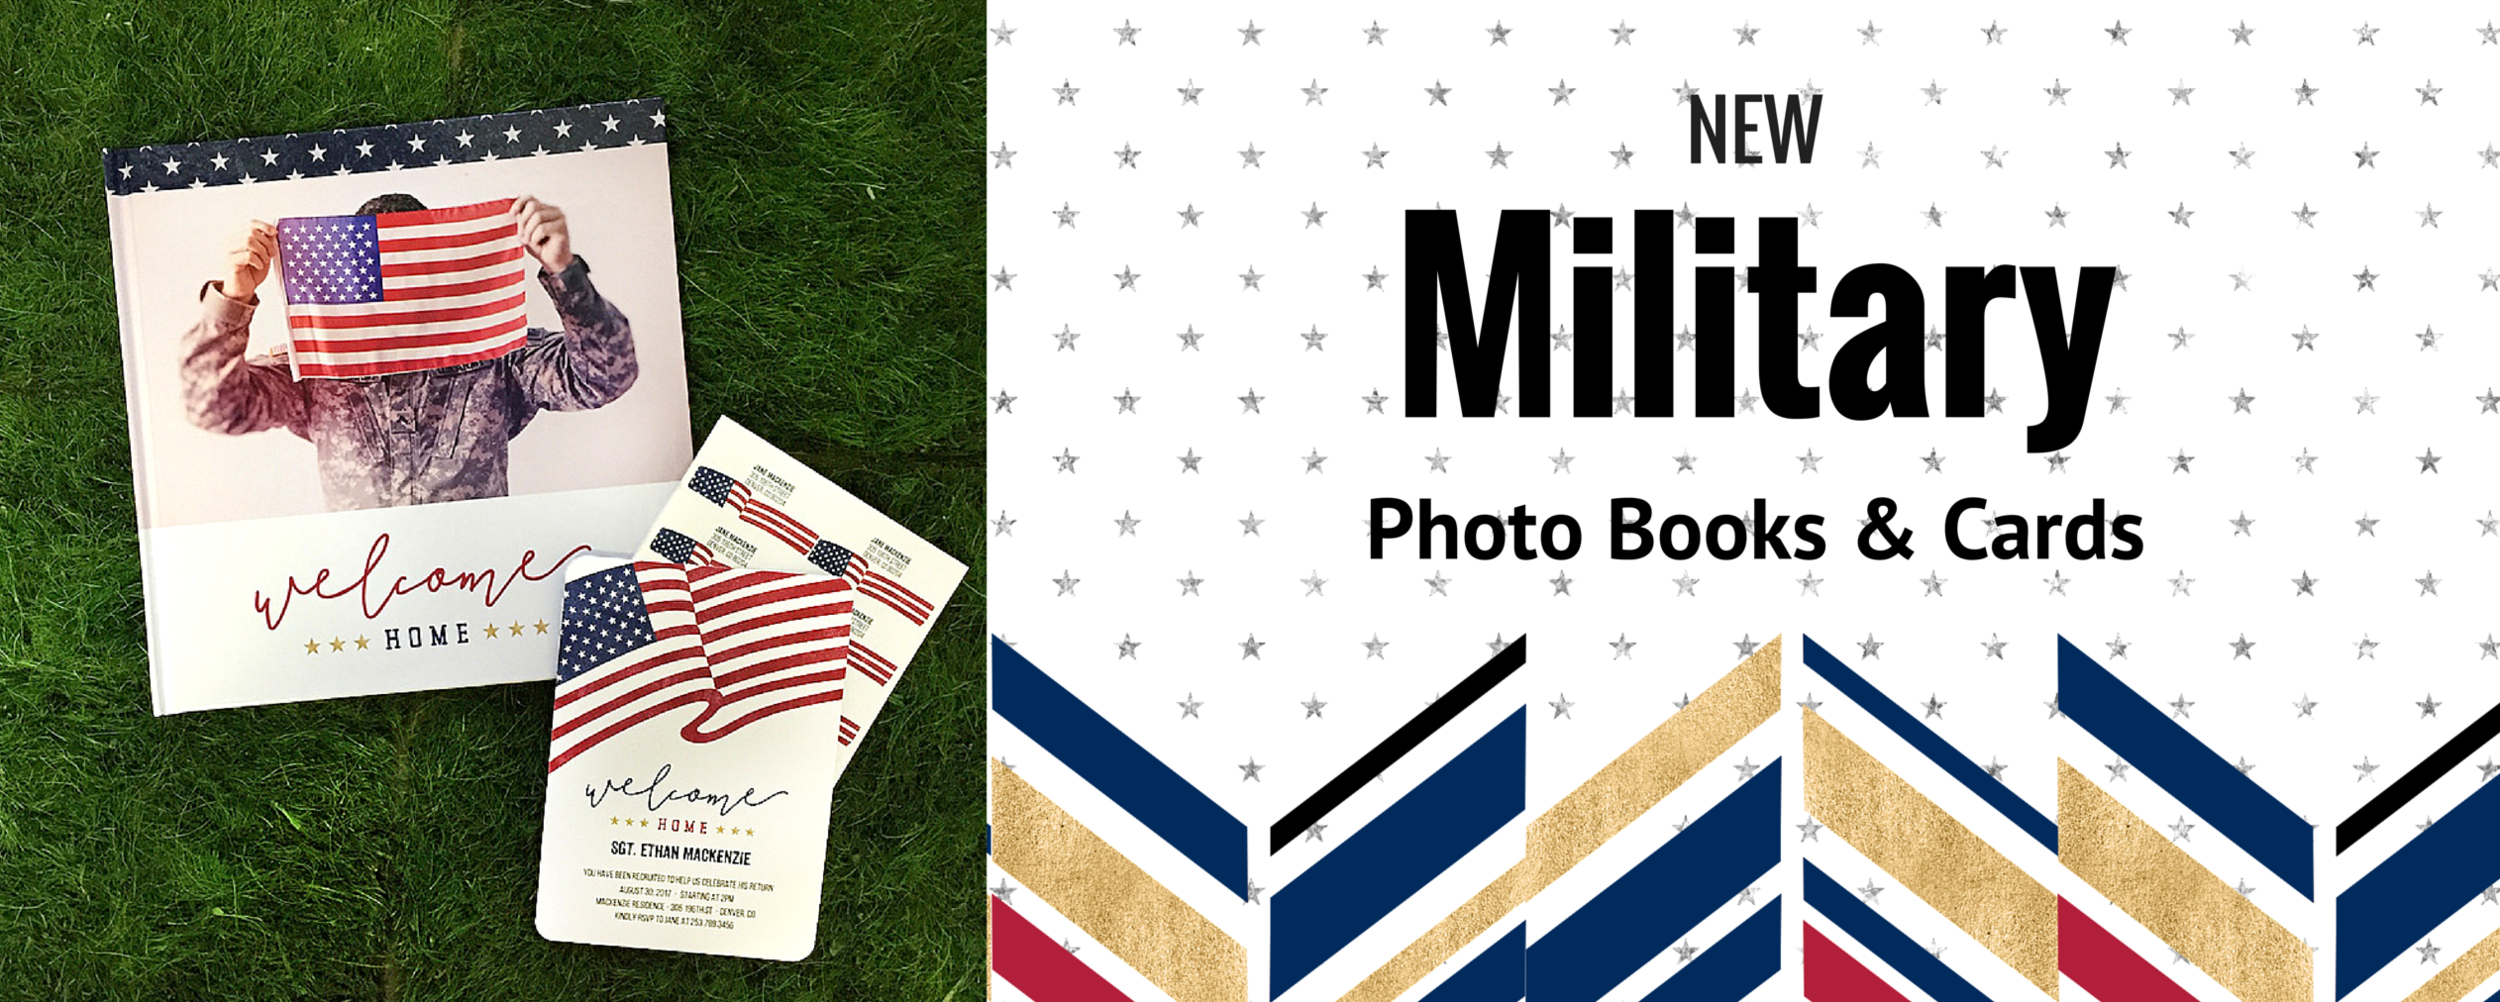 New Military Photo Book & Cards